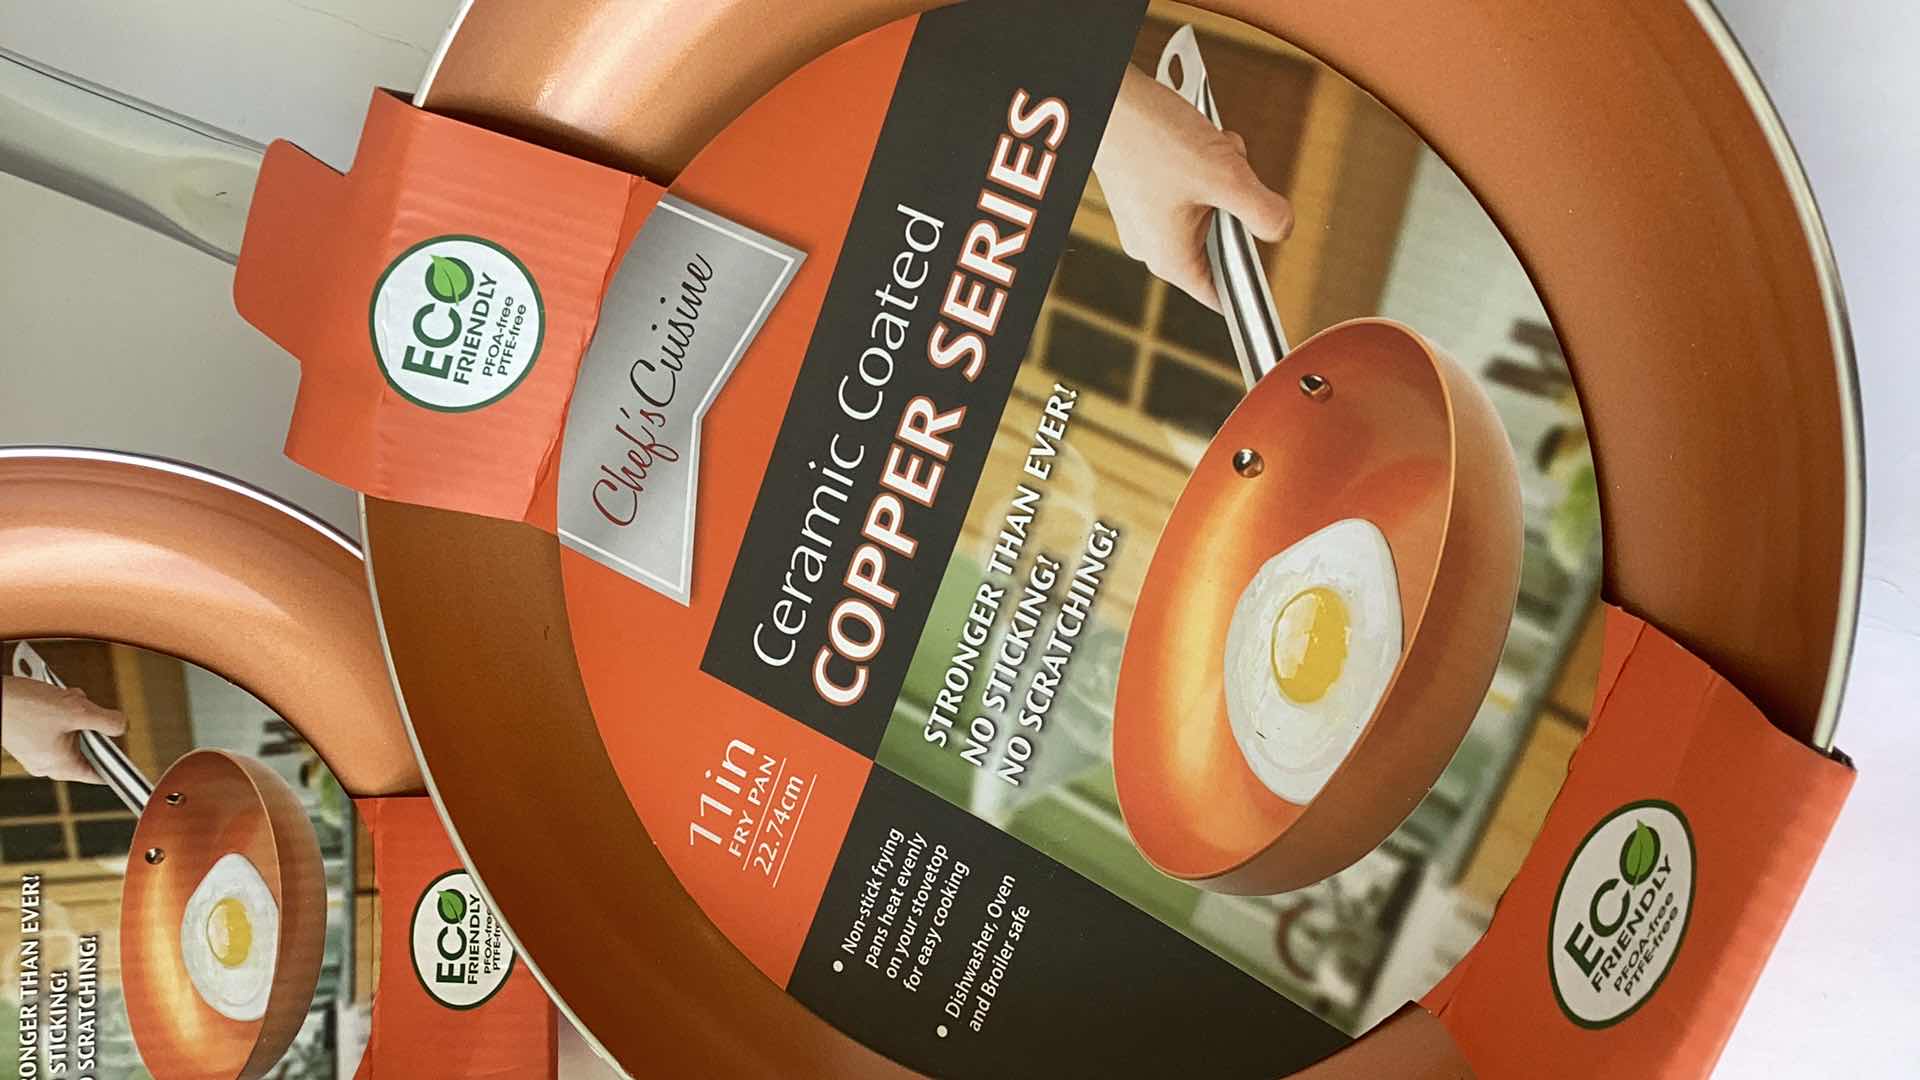 Photo 4 of CHEF’S CUISINE CERAMIC COATED COPPER COOKWARE BRAND NEW